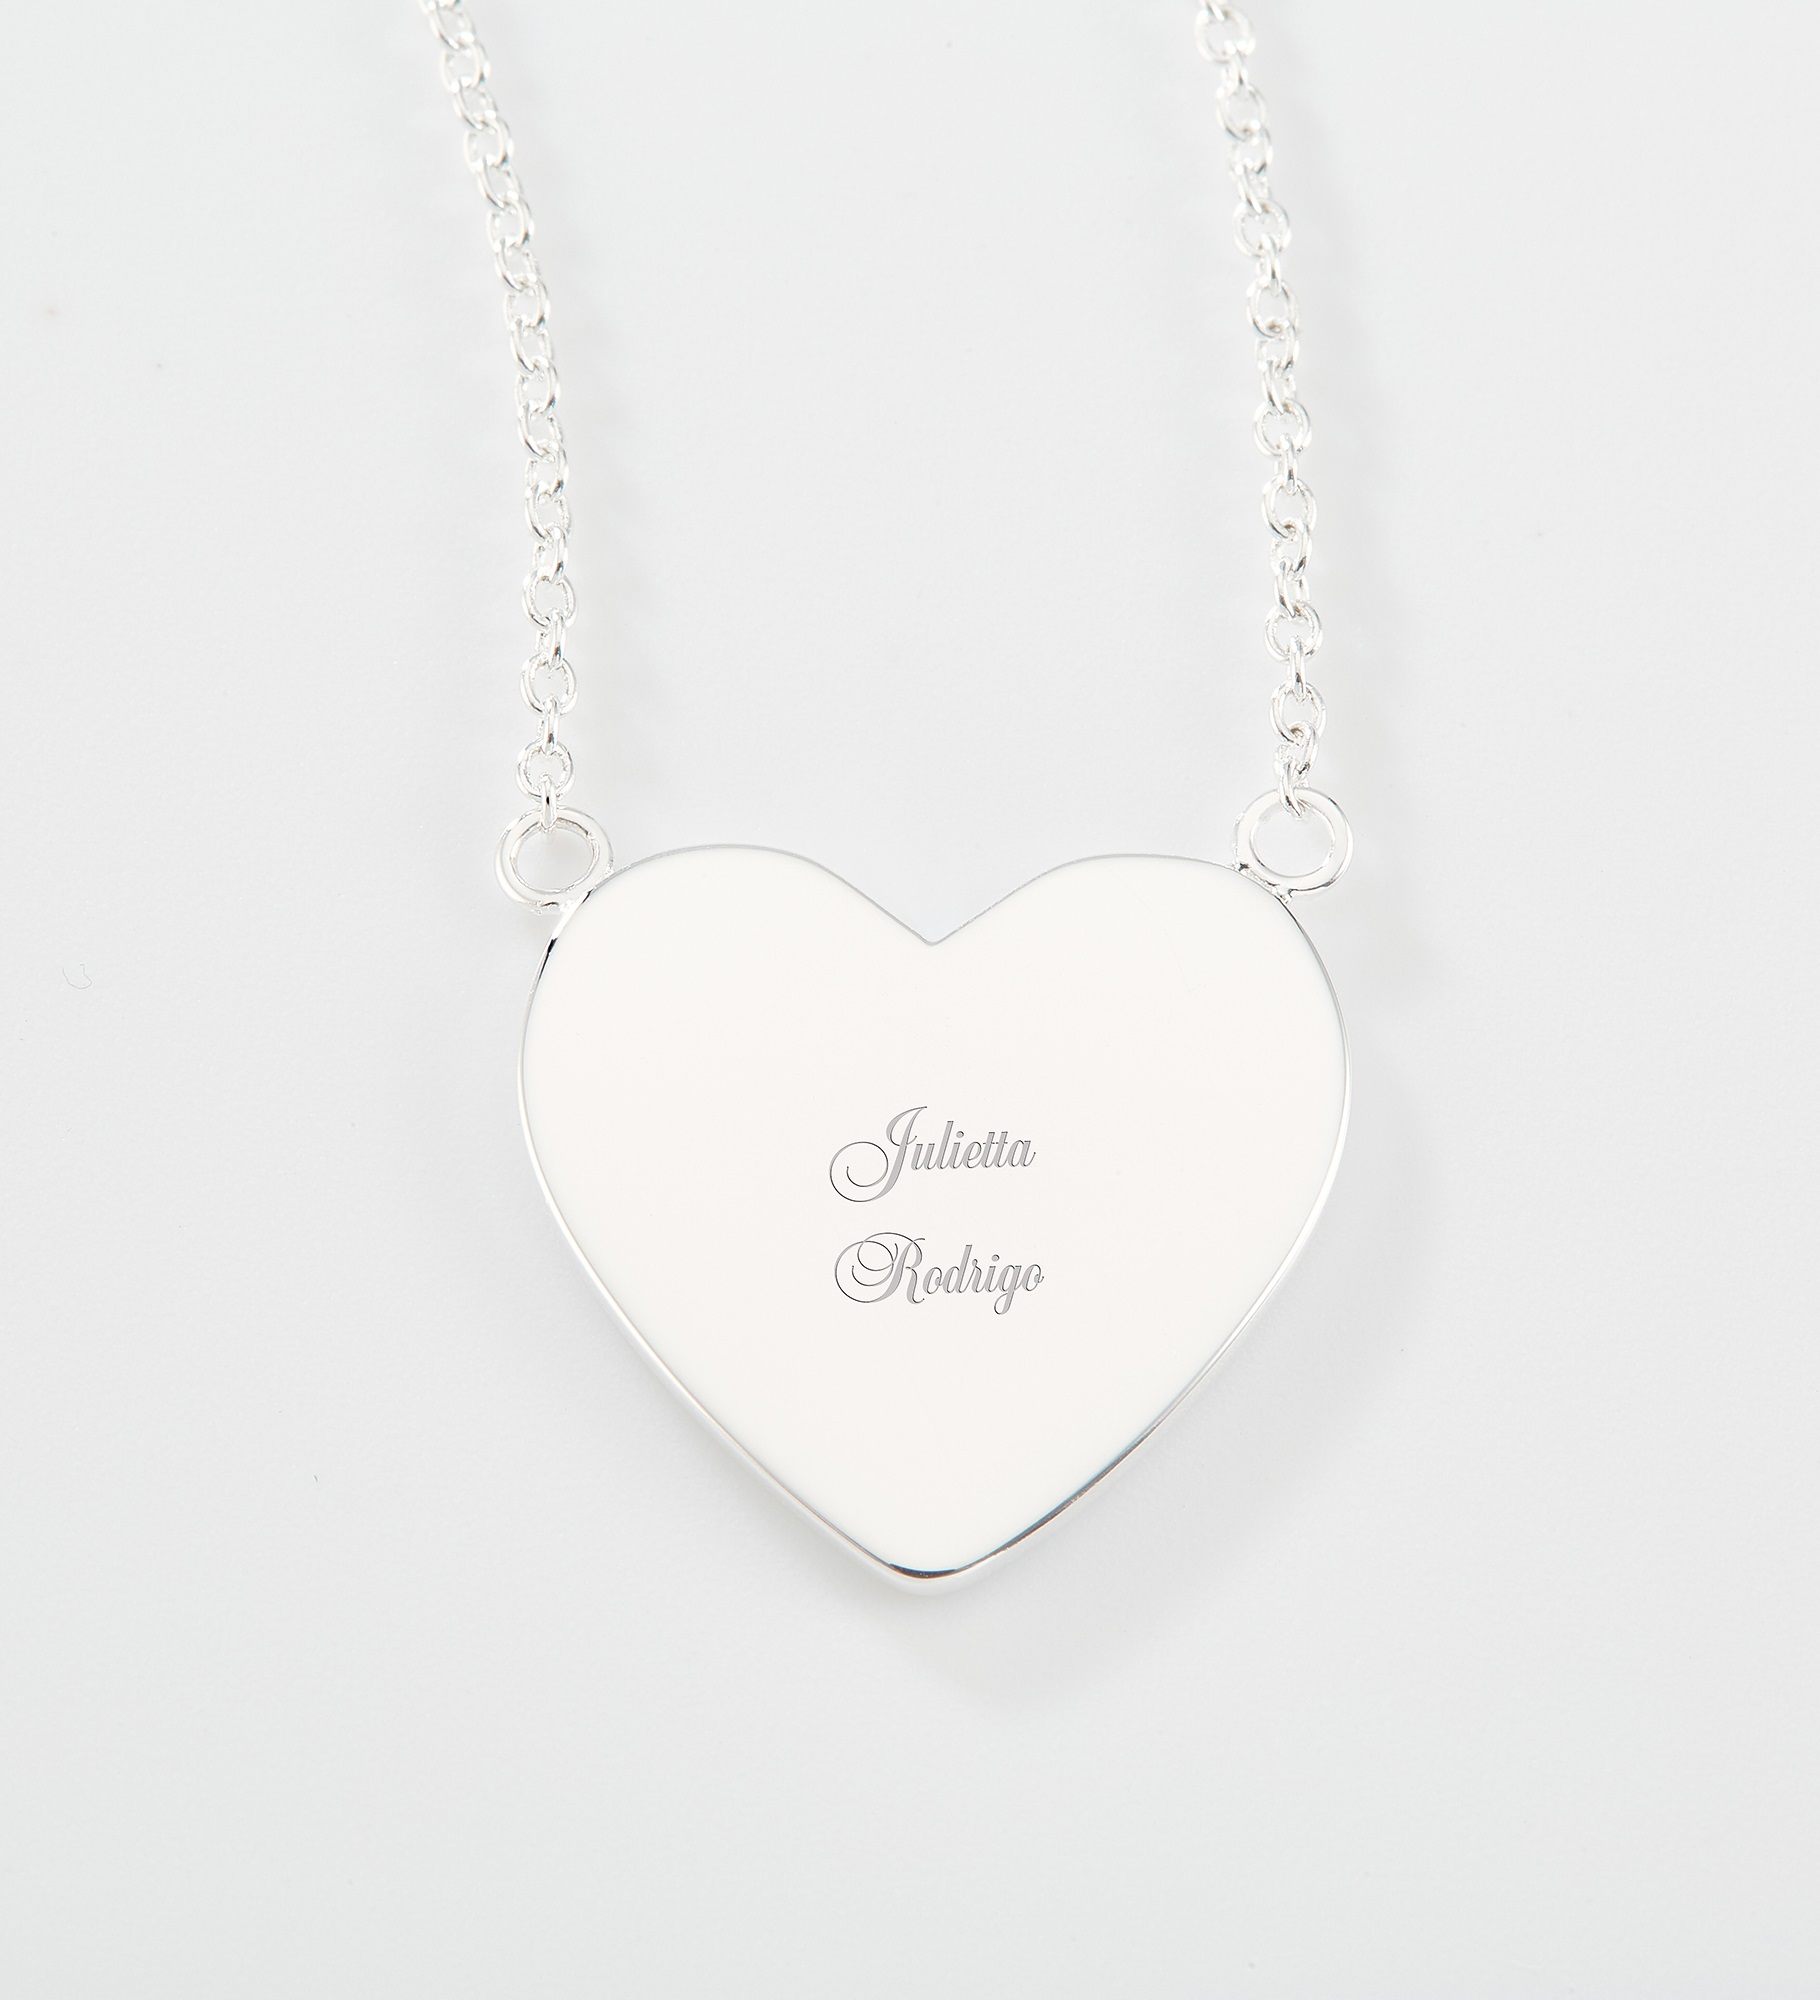  Engraved Sterling Silver Heart Necklace